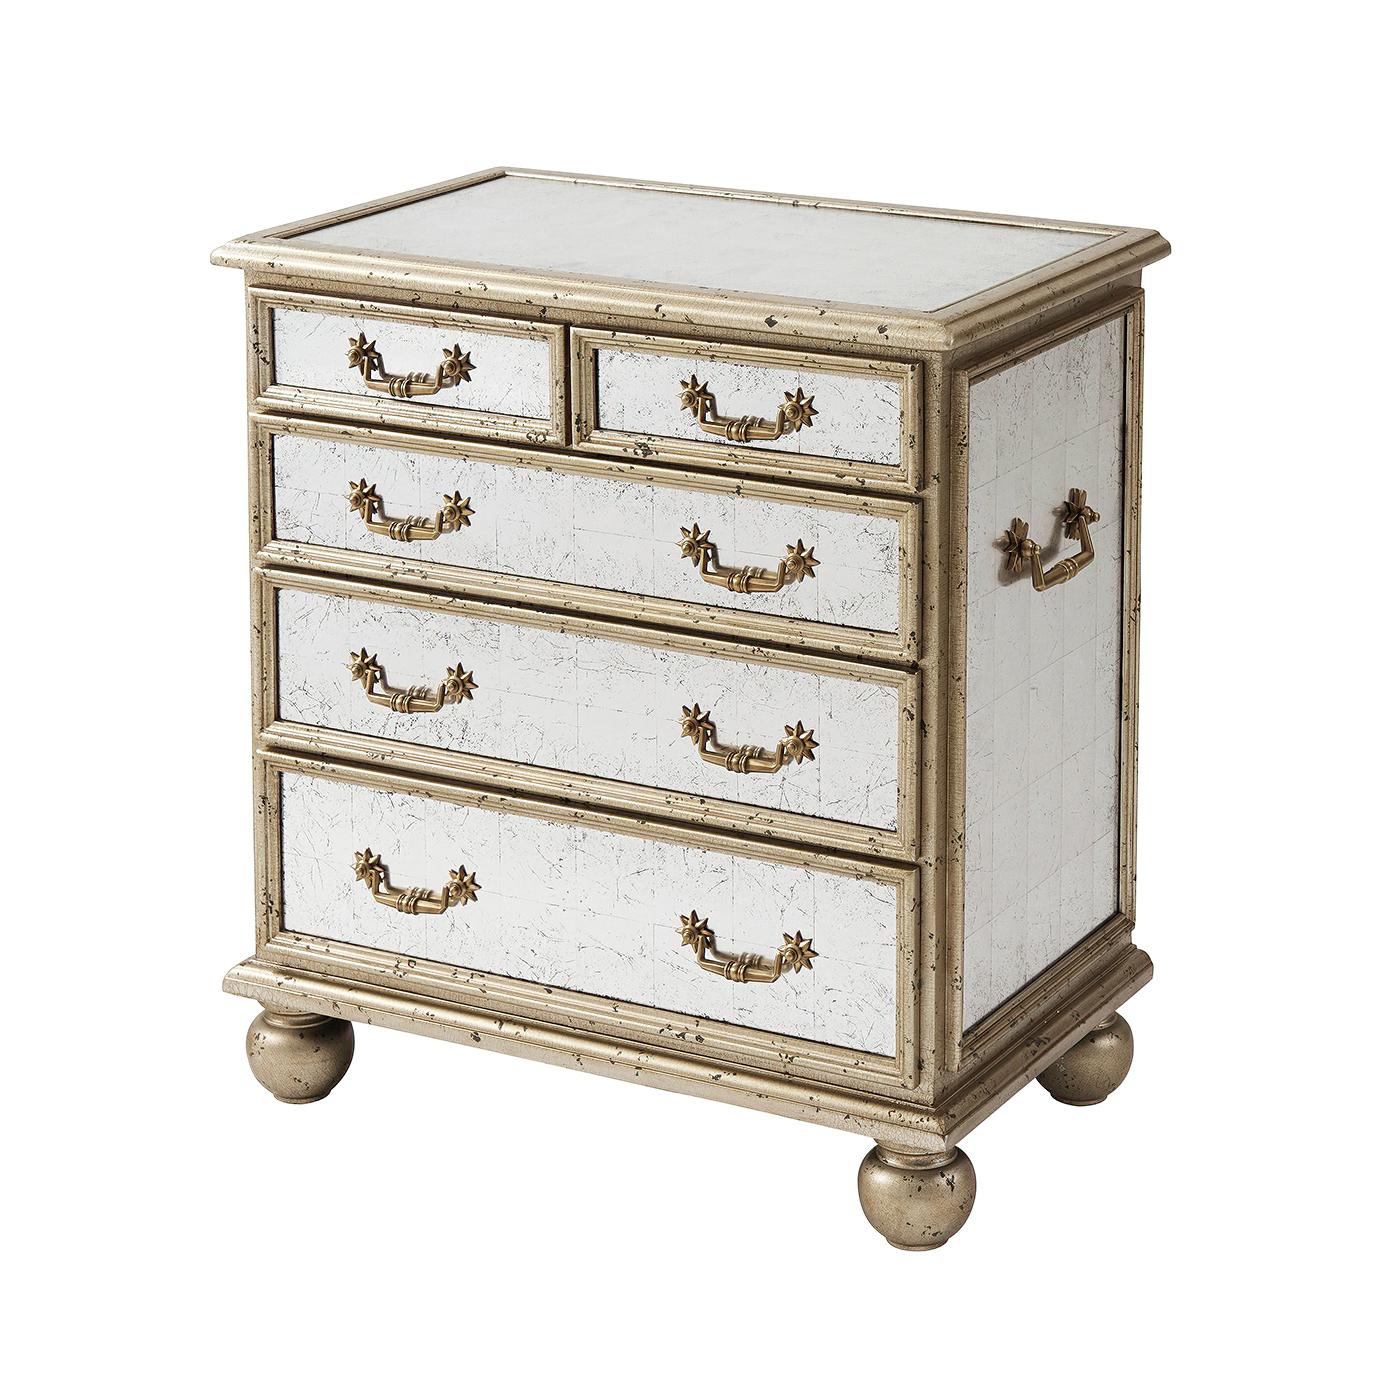 An Art Deco style silver leaf and antiqued trellis hand mirrored bedside chest of drawers, the rectangular mirror paneled top above two short and three long drawers fitted with brass handles, on bun feet. 
Dimensions: 27.25